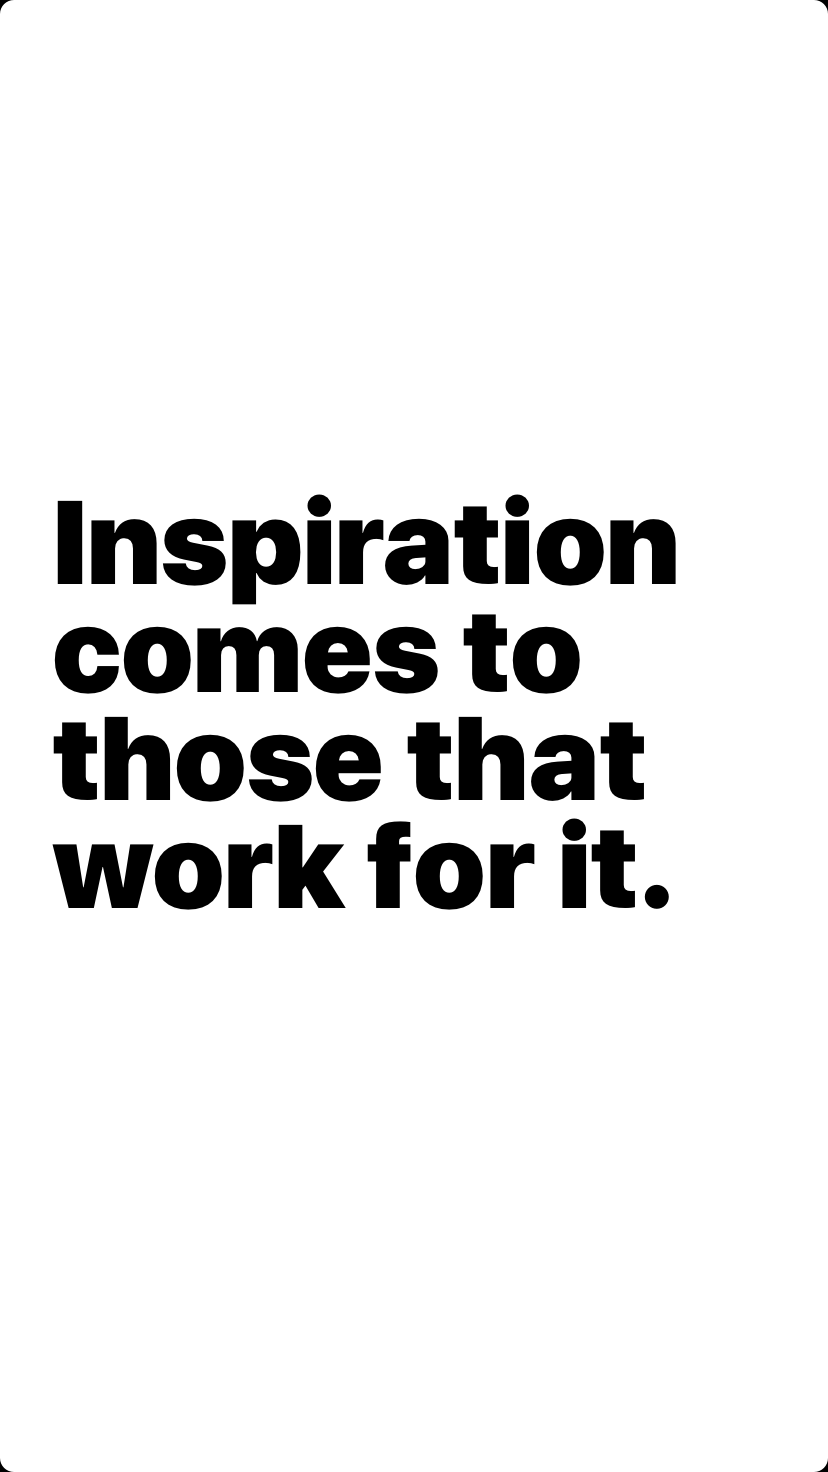 Inspiration comes to those that work for it.